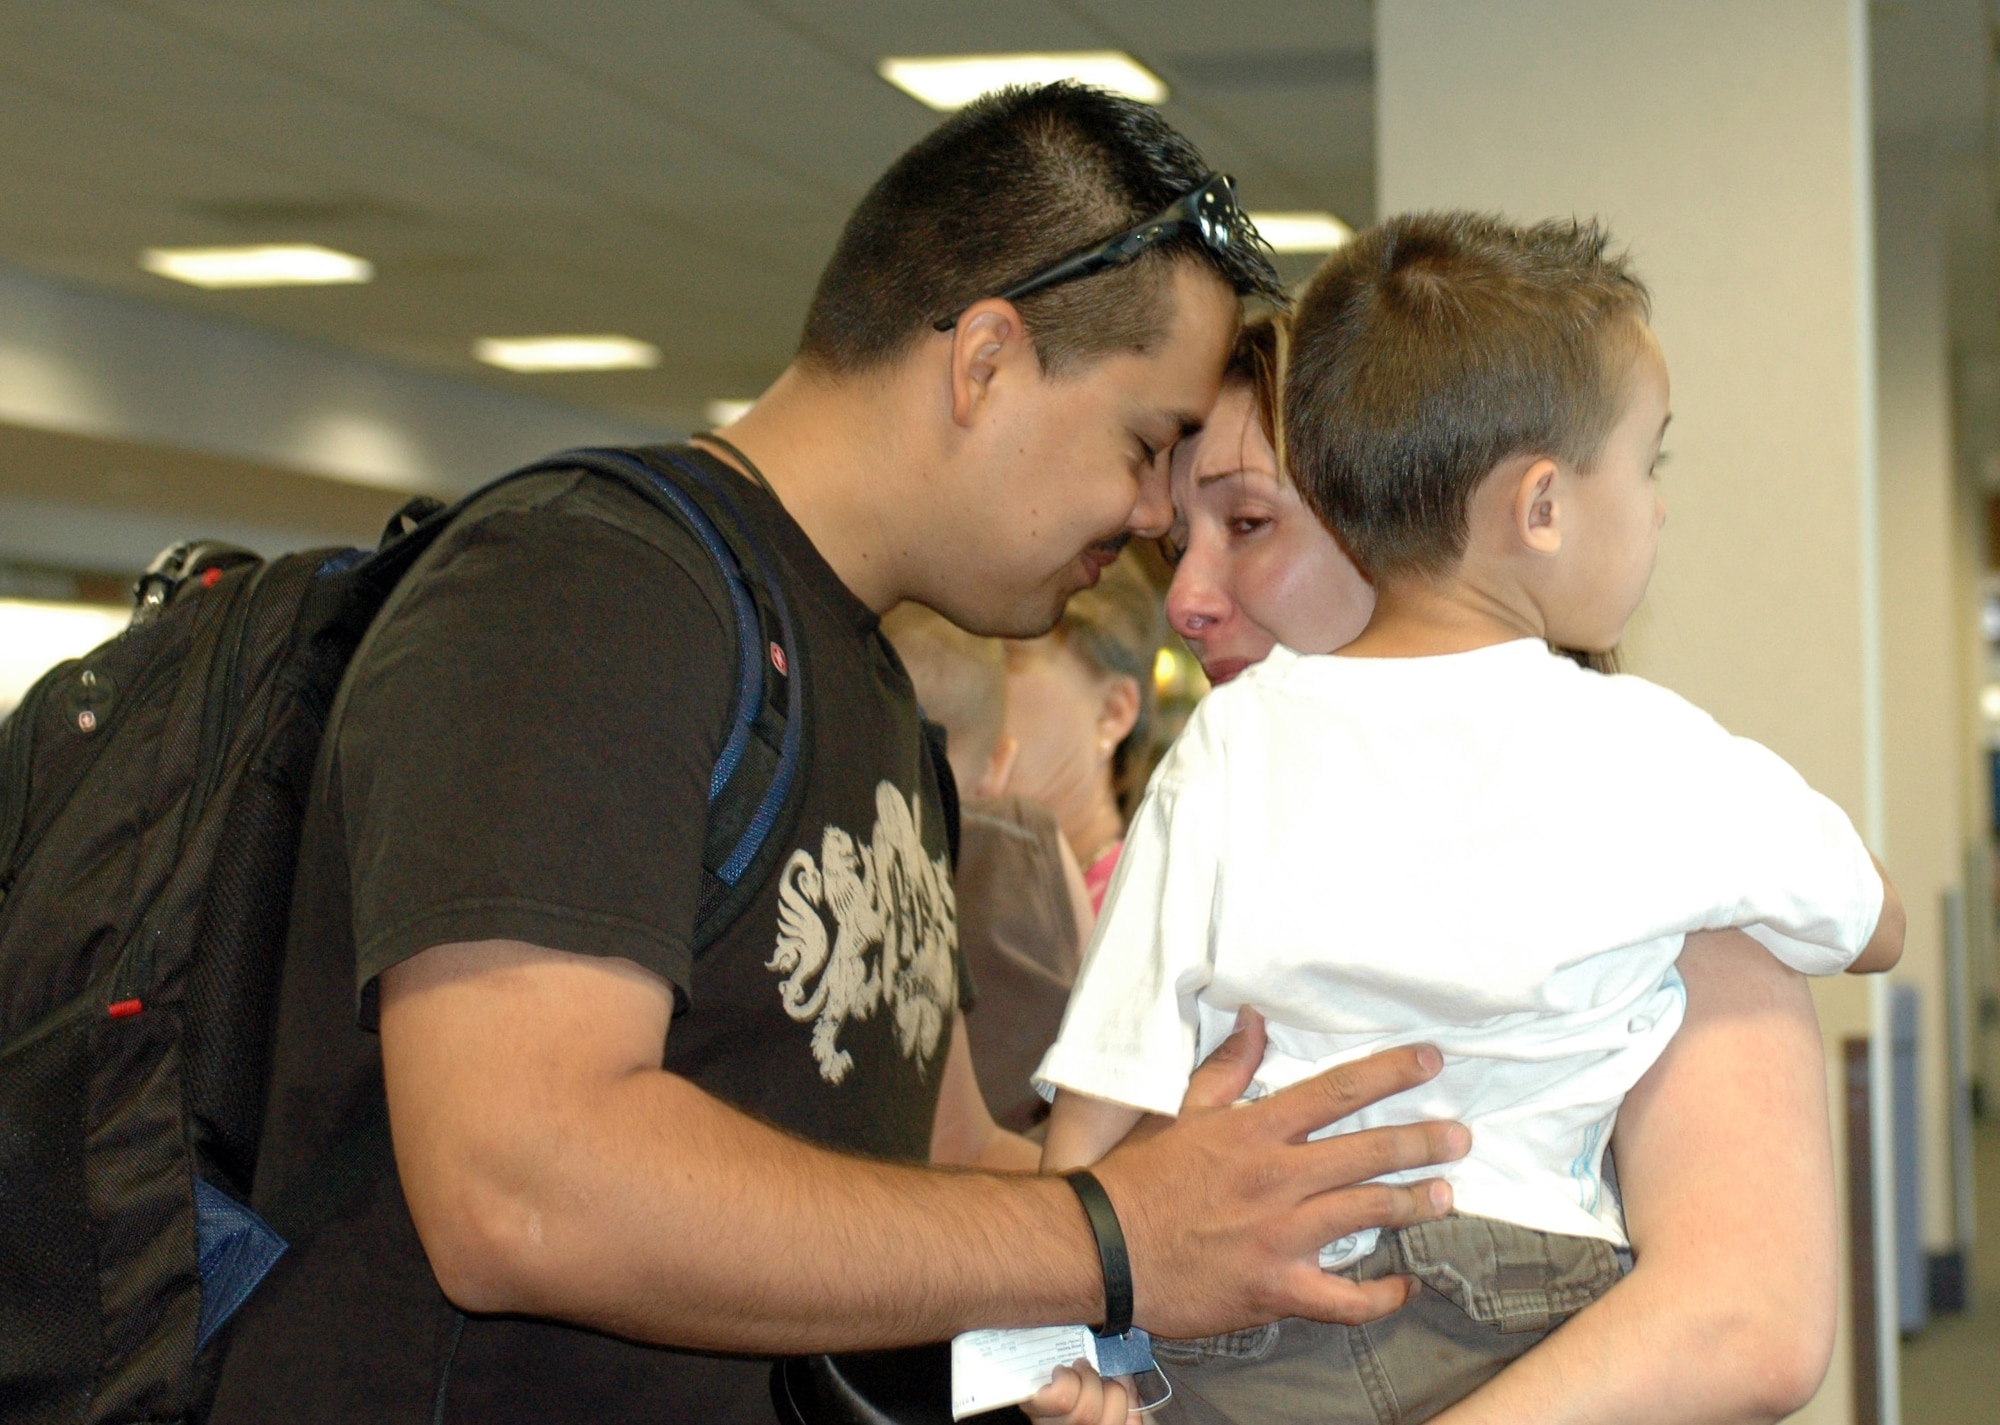 Staff Sgt. Santos Flores bids farewell to his wife Yvette and his son Andres at Tucson International Airport on his way to Al Dhafra Air Base in the United Arab Emirates, June 8. He left with nine fellow Guardsmen from the 162nd Fighter Wing’s force support squadron to provide food, fitness, lodging and recreation services to U.S. military members deployed to the area. The group is scheduled to return to Tucson in November. The deployment is Sergeant Flores’ first. (Air National Guard photo by Tech. Sgt. Desiree Twombly)